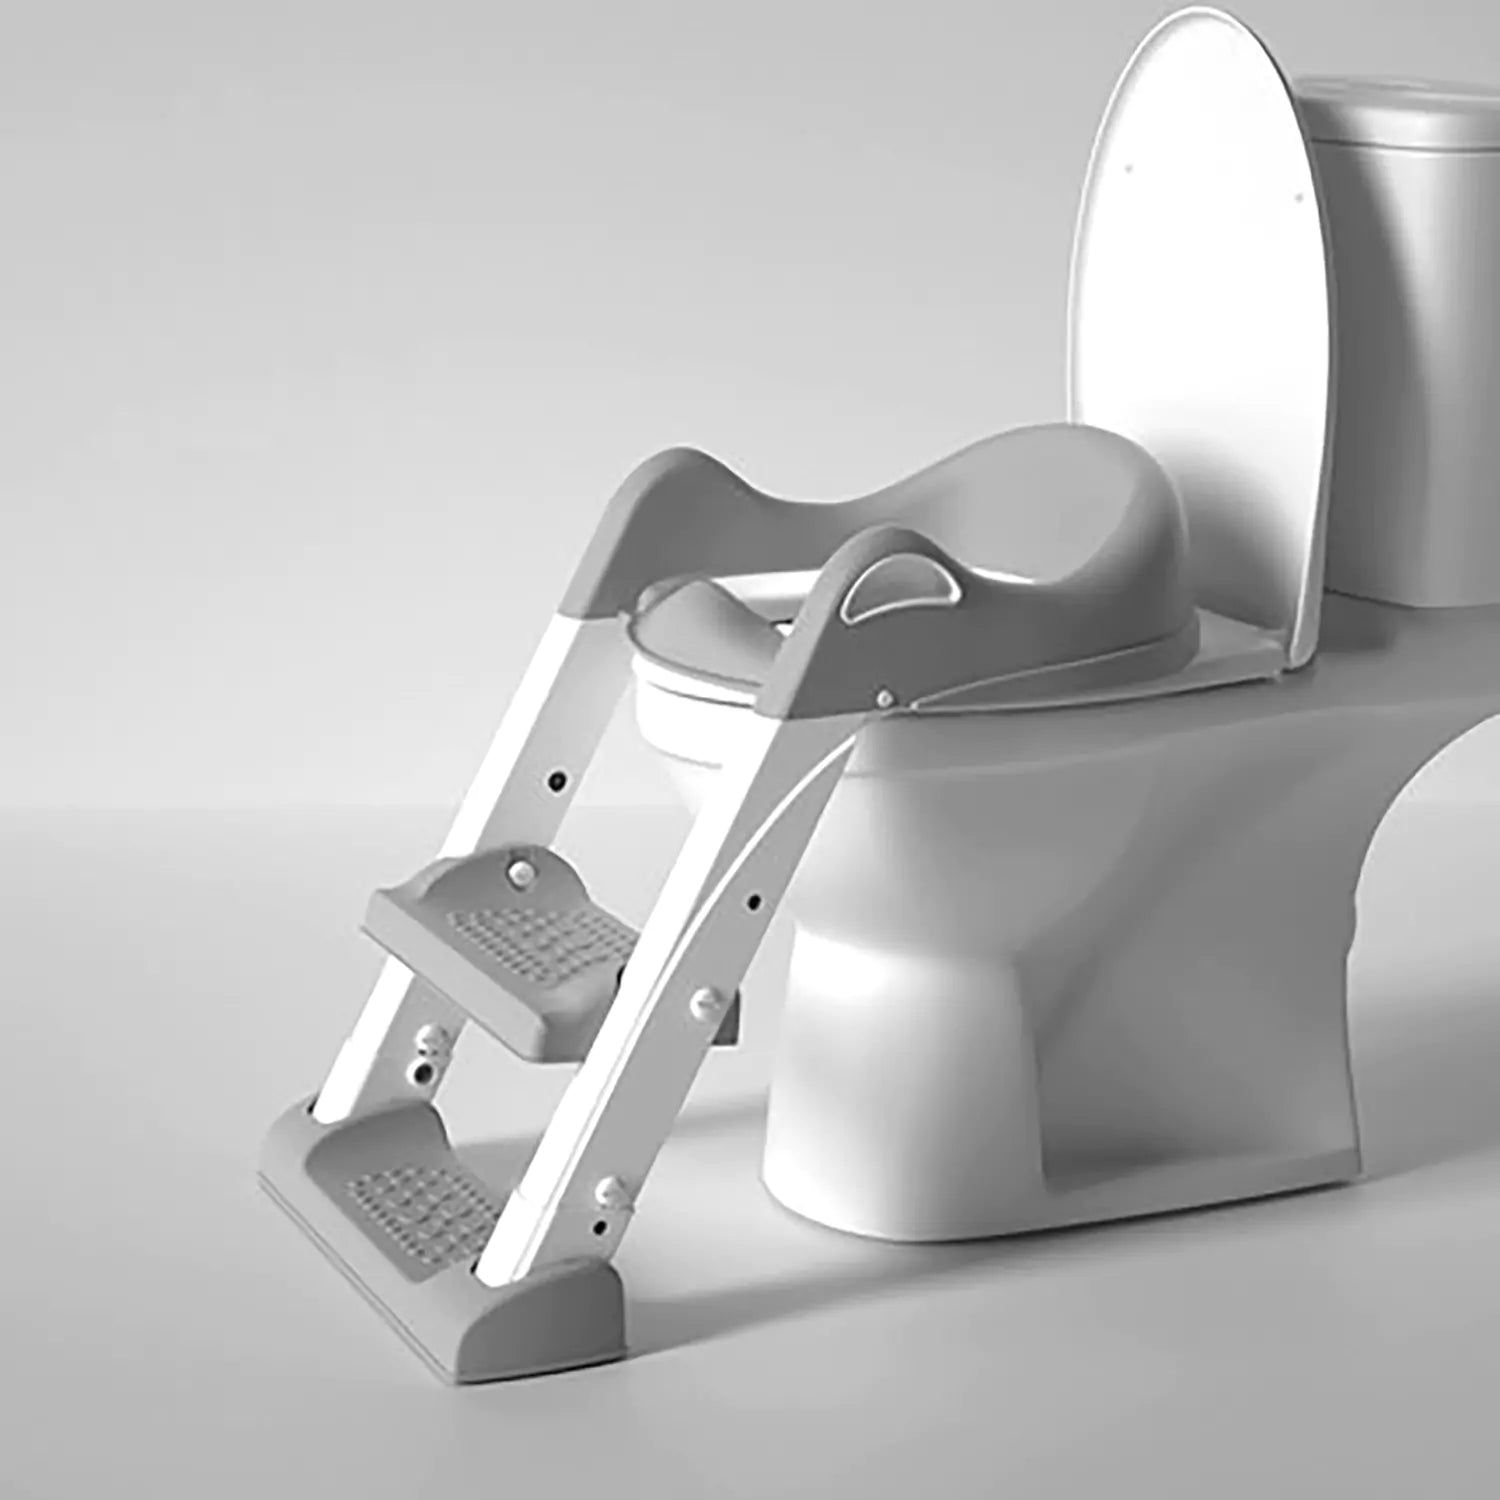 An image of Potty Training Seat with Ladder - Safe, Easy, and Convenient